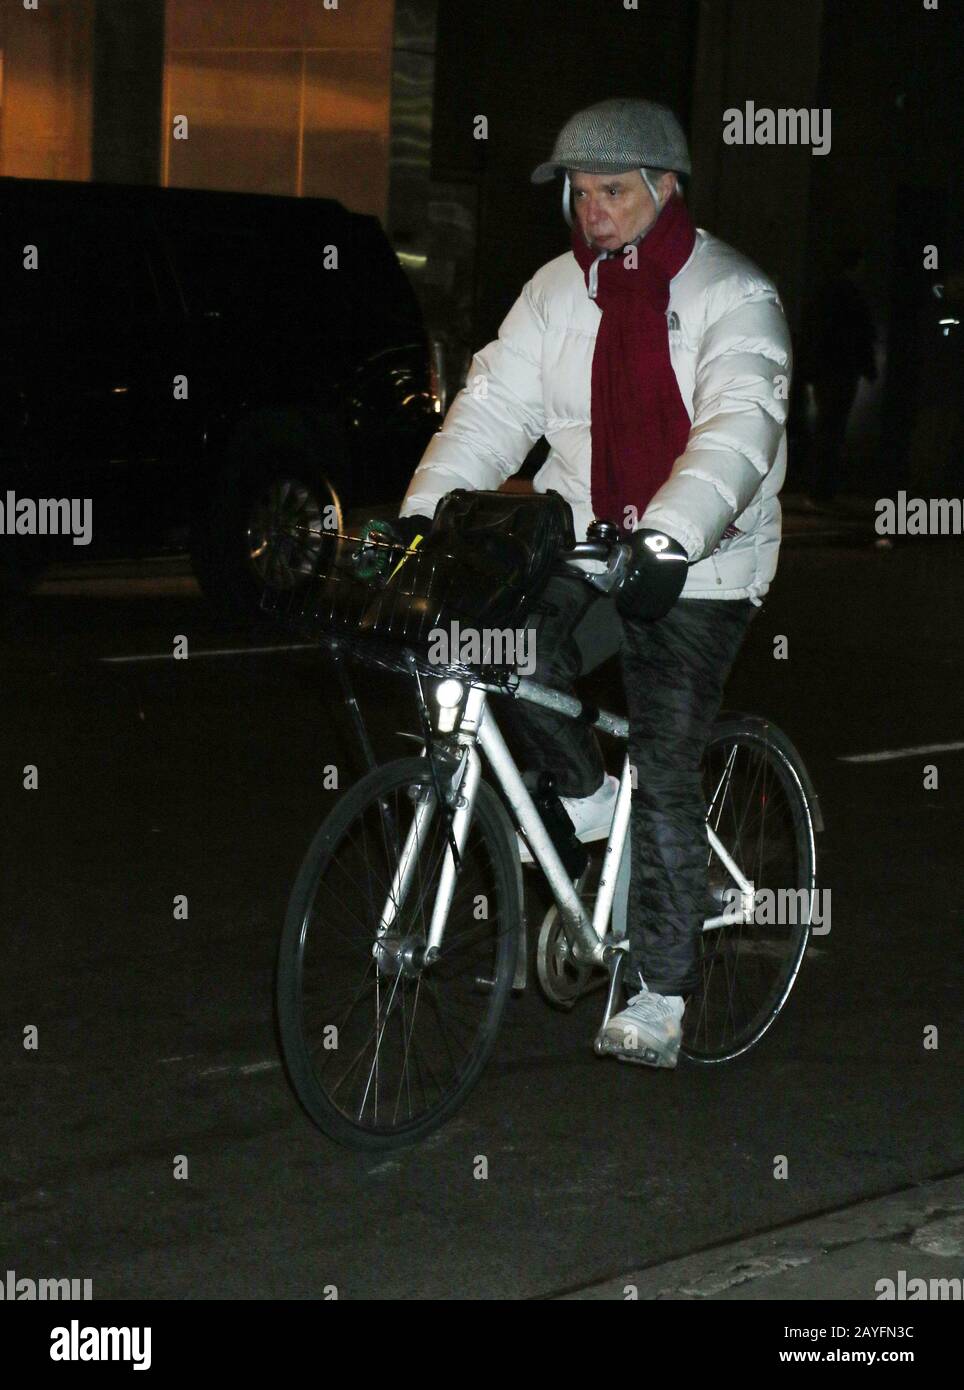 New York, NY, USA. 14th Feb, 2020. David Byrne seen arriving to his Broadway show American Utopia at the Hudson Theatre in New York City on February 14, 2020. Credit: Rw/Media Punch/Alamy Live News Stock Photo